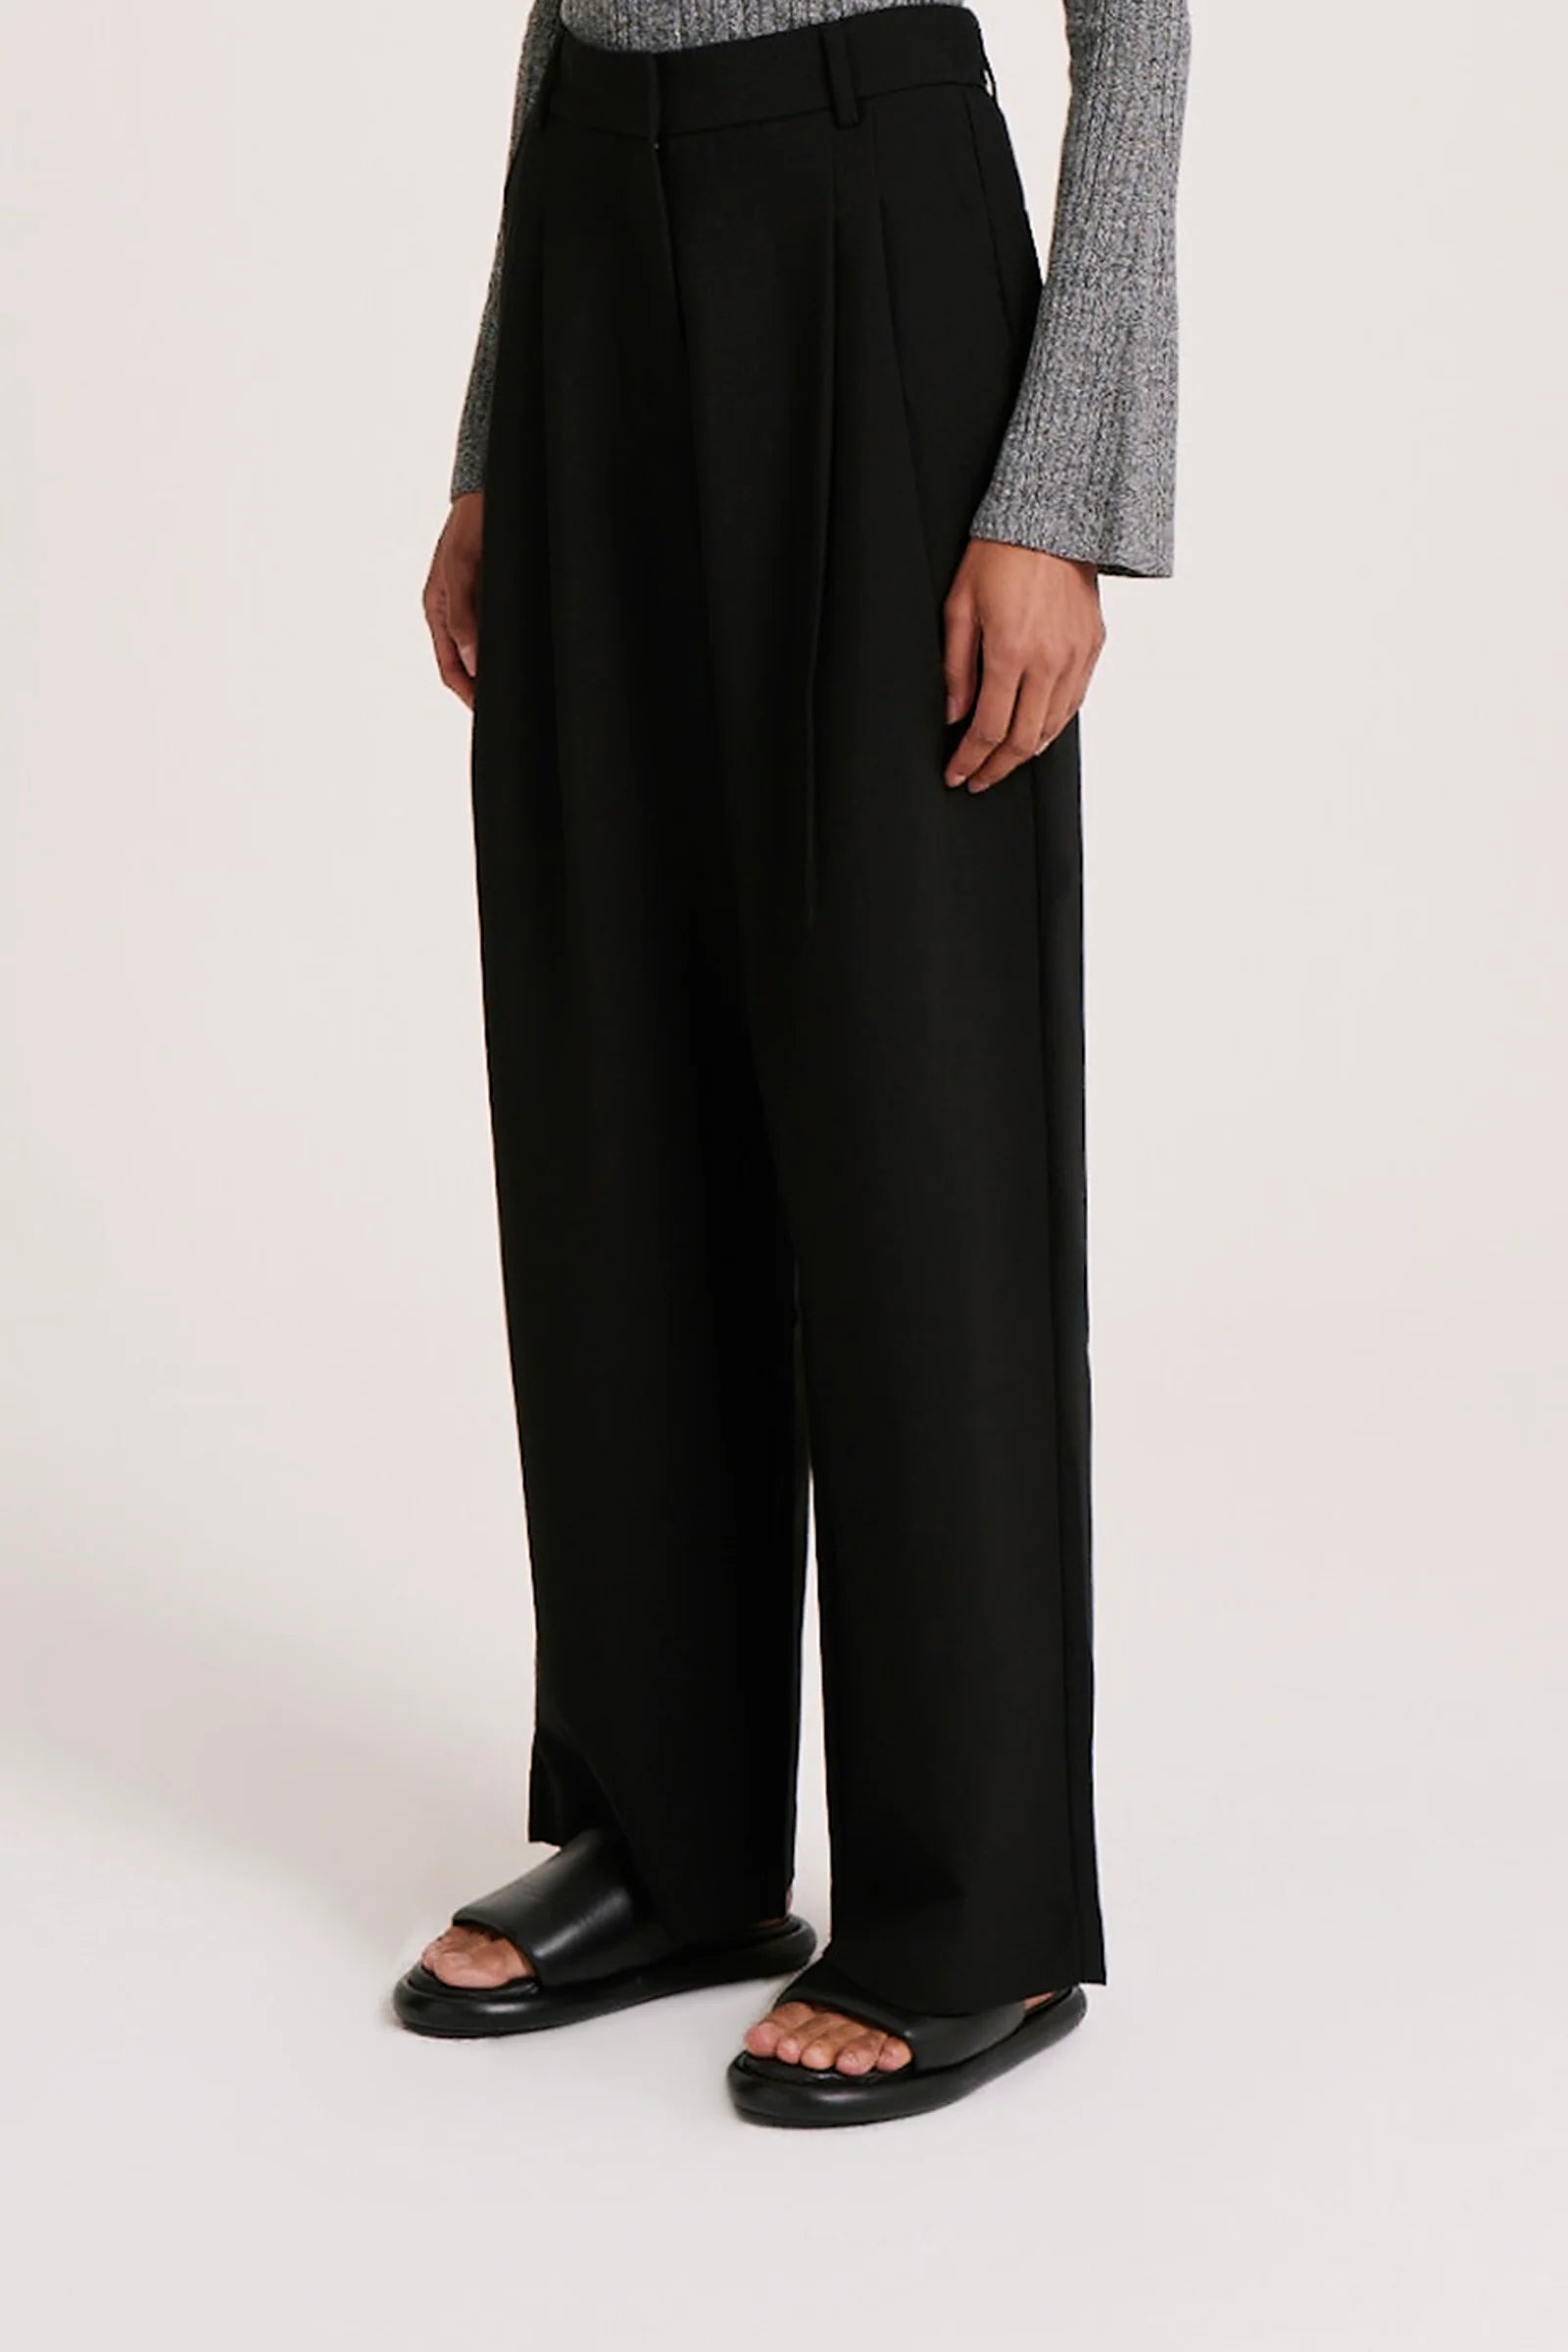 Nude Lucy Manon Tailored Pant Black